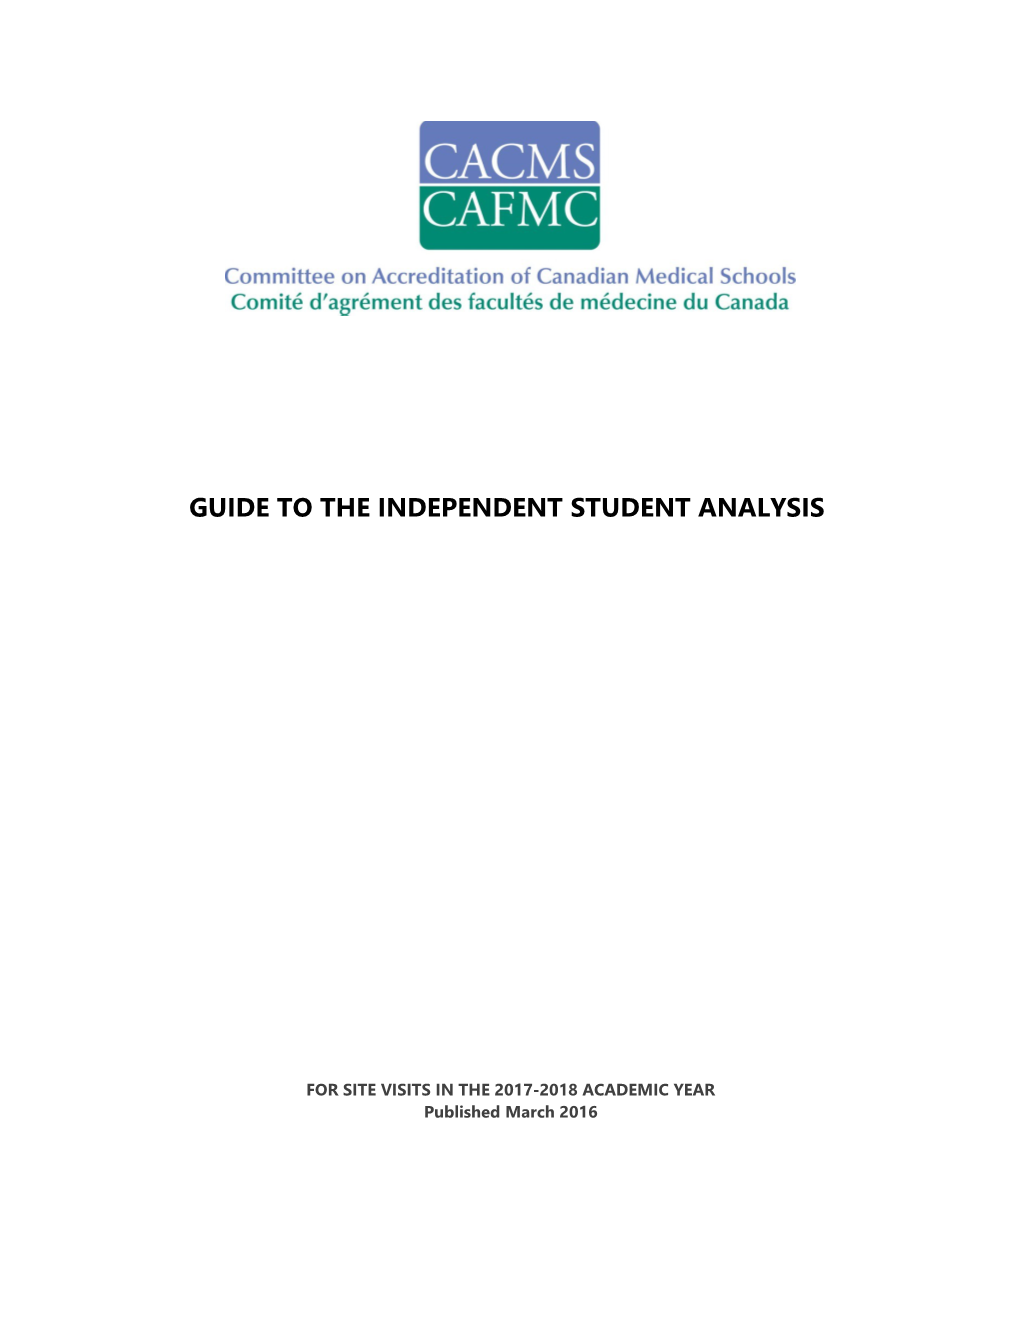 Guide to the Independent Student Analysis